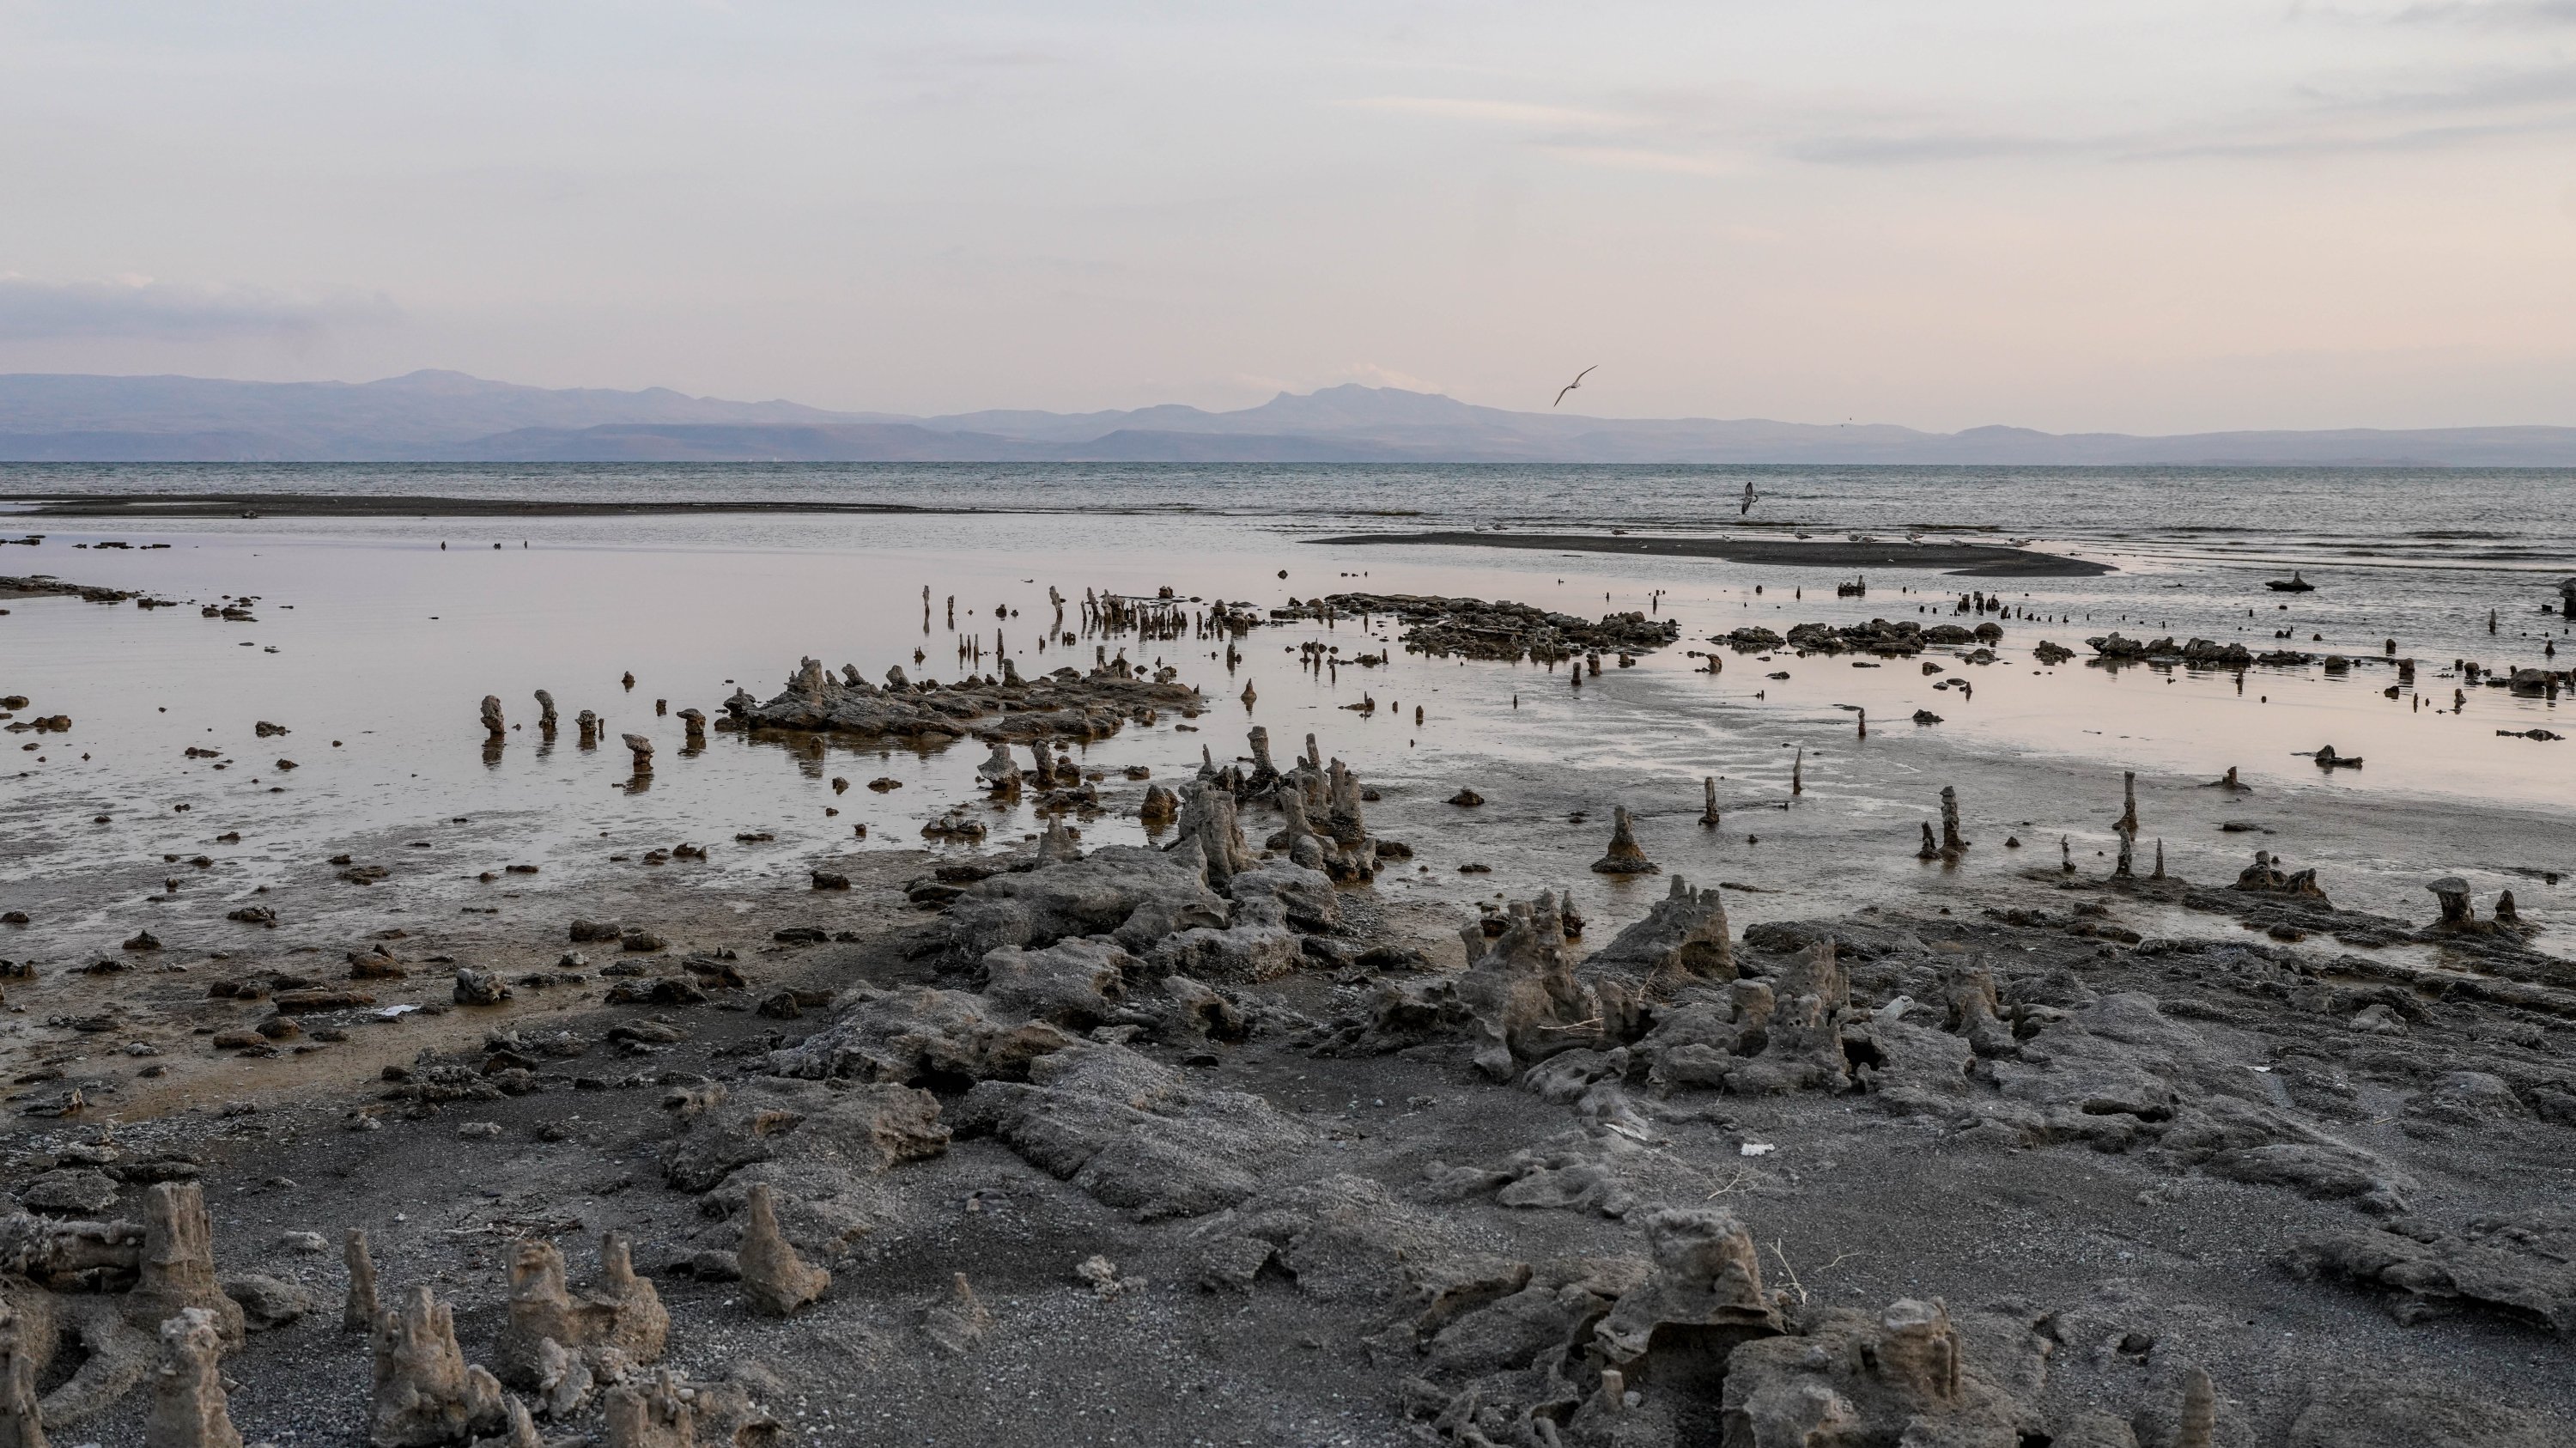 A view of microbialites in Lake Van that emerged from the bottom due to the decline in water levels, in Van, eastern Turkey, Dec. 12, 2021. (PHOTO BY UĞUR YILDIRIM)